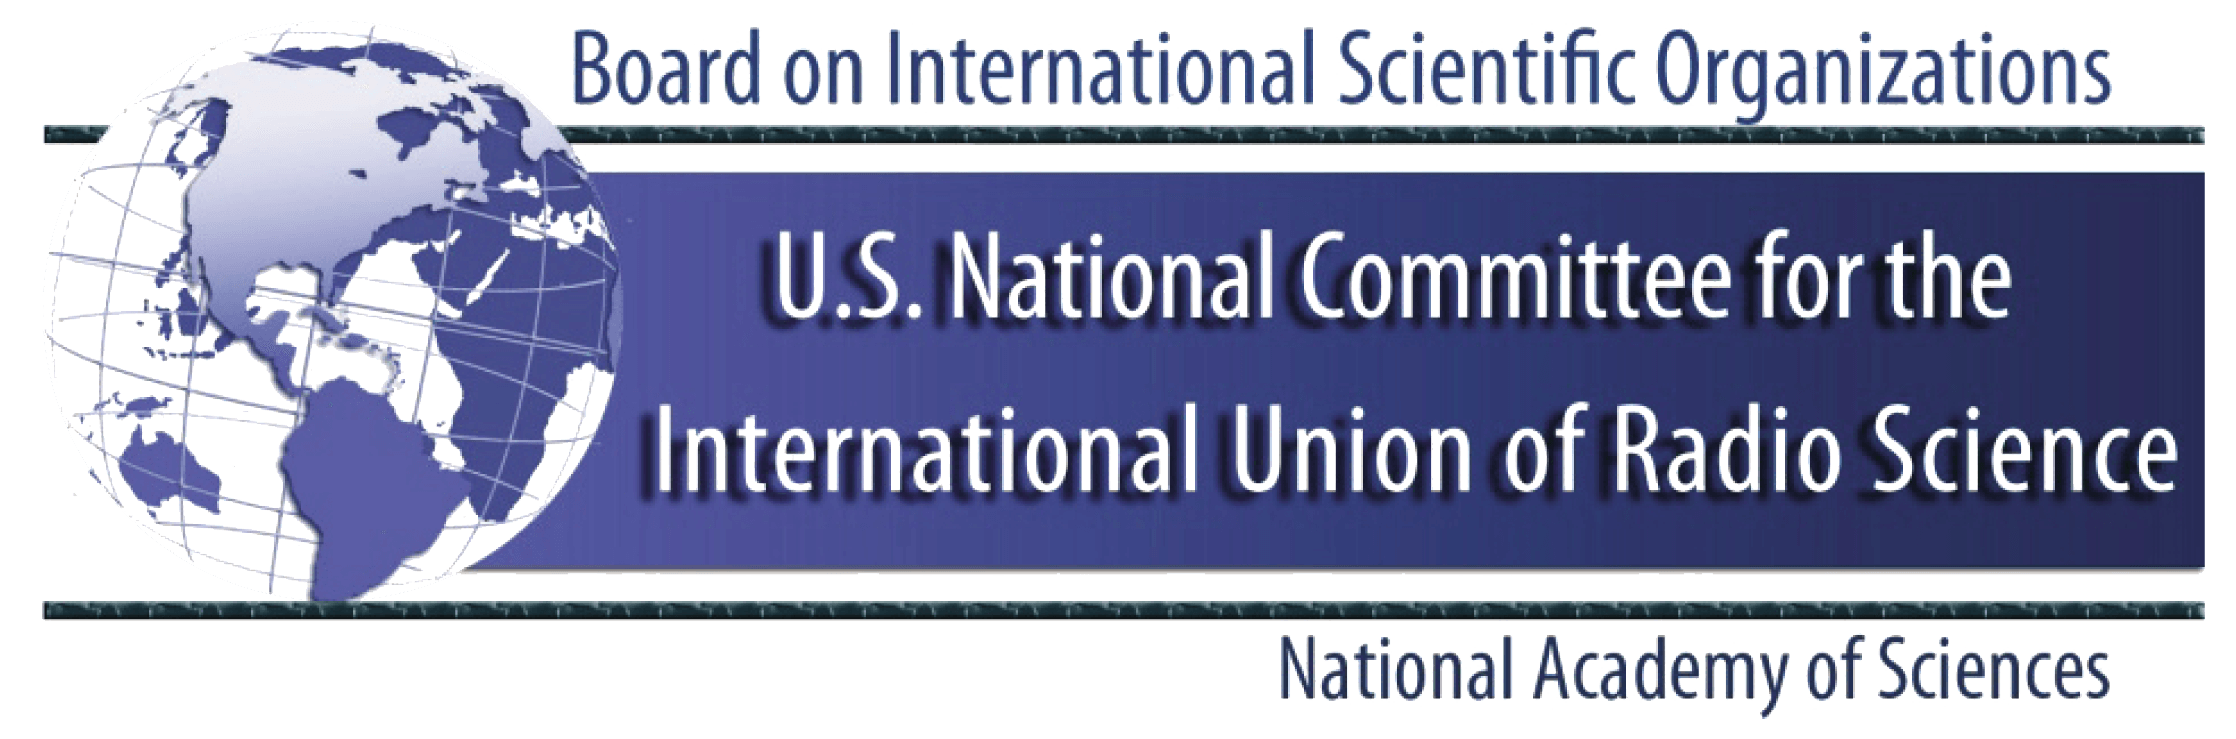 U.S. NATIONAL COMMITTEE FOR URSI